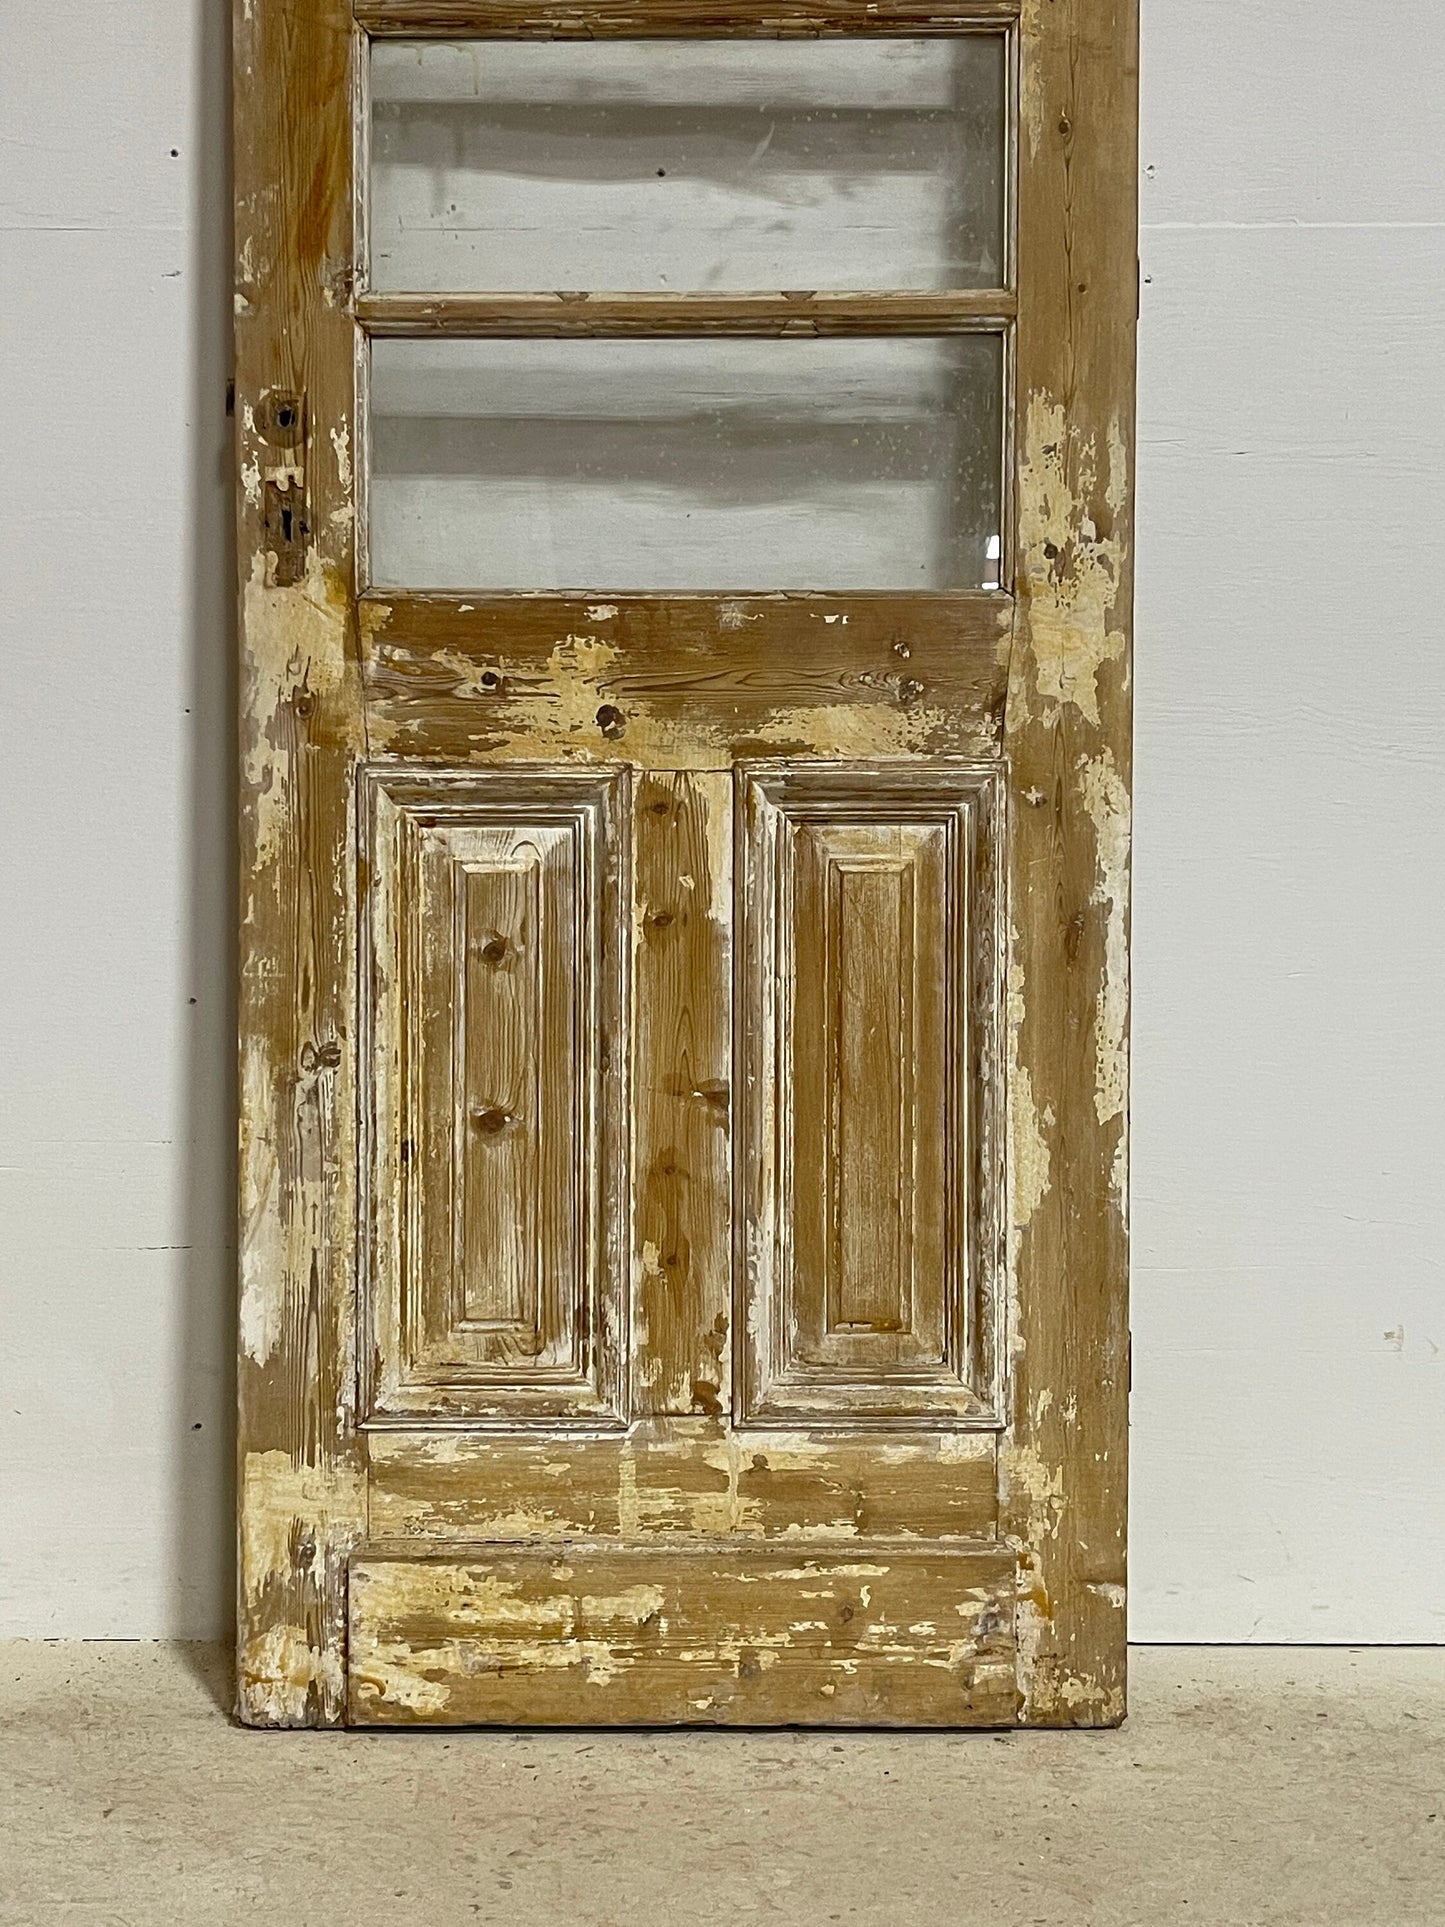 Antique French panel door with glass (85x28.25) G1493s